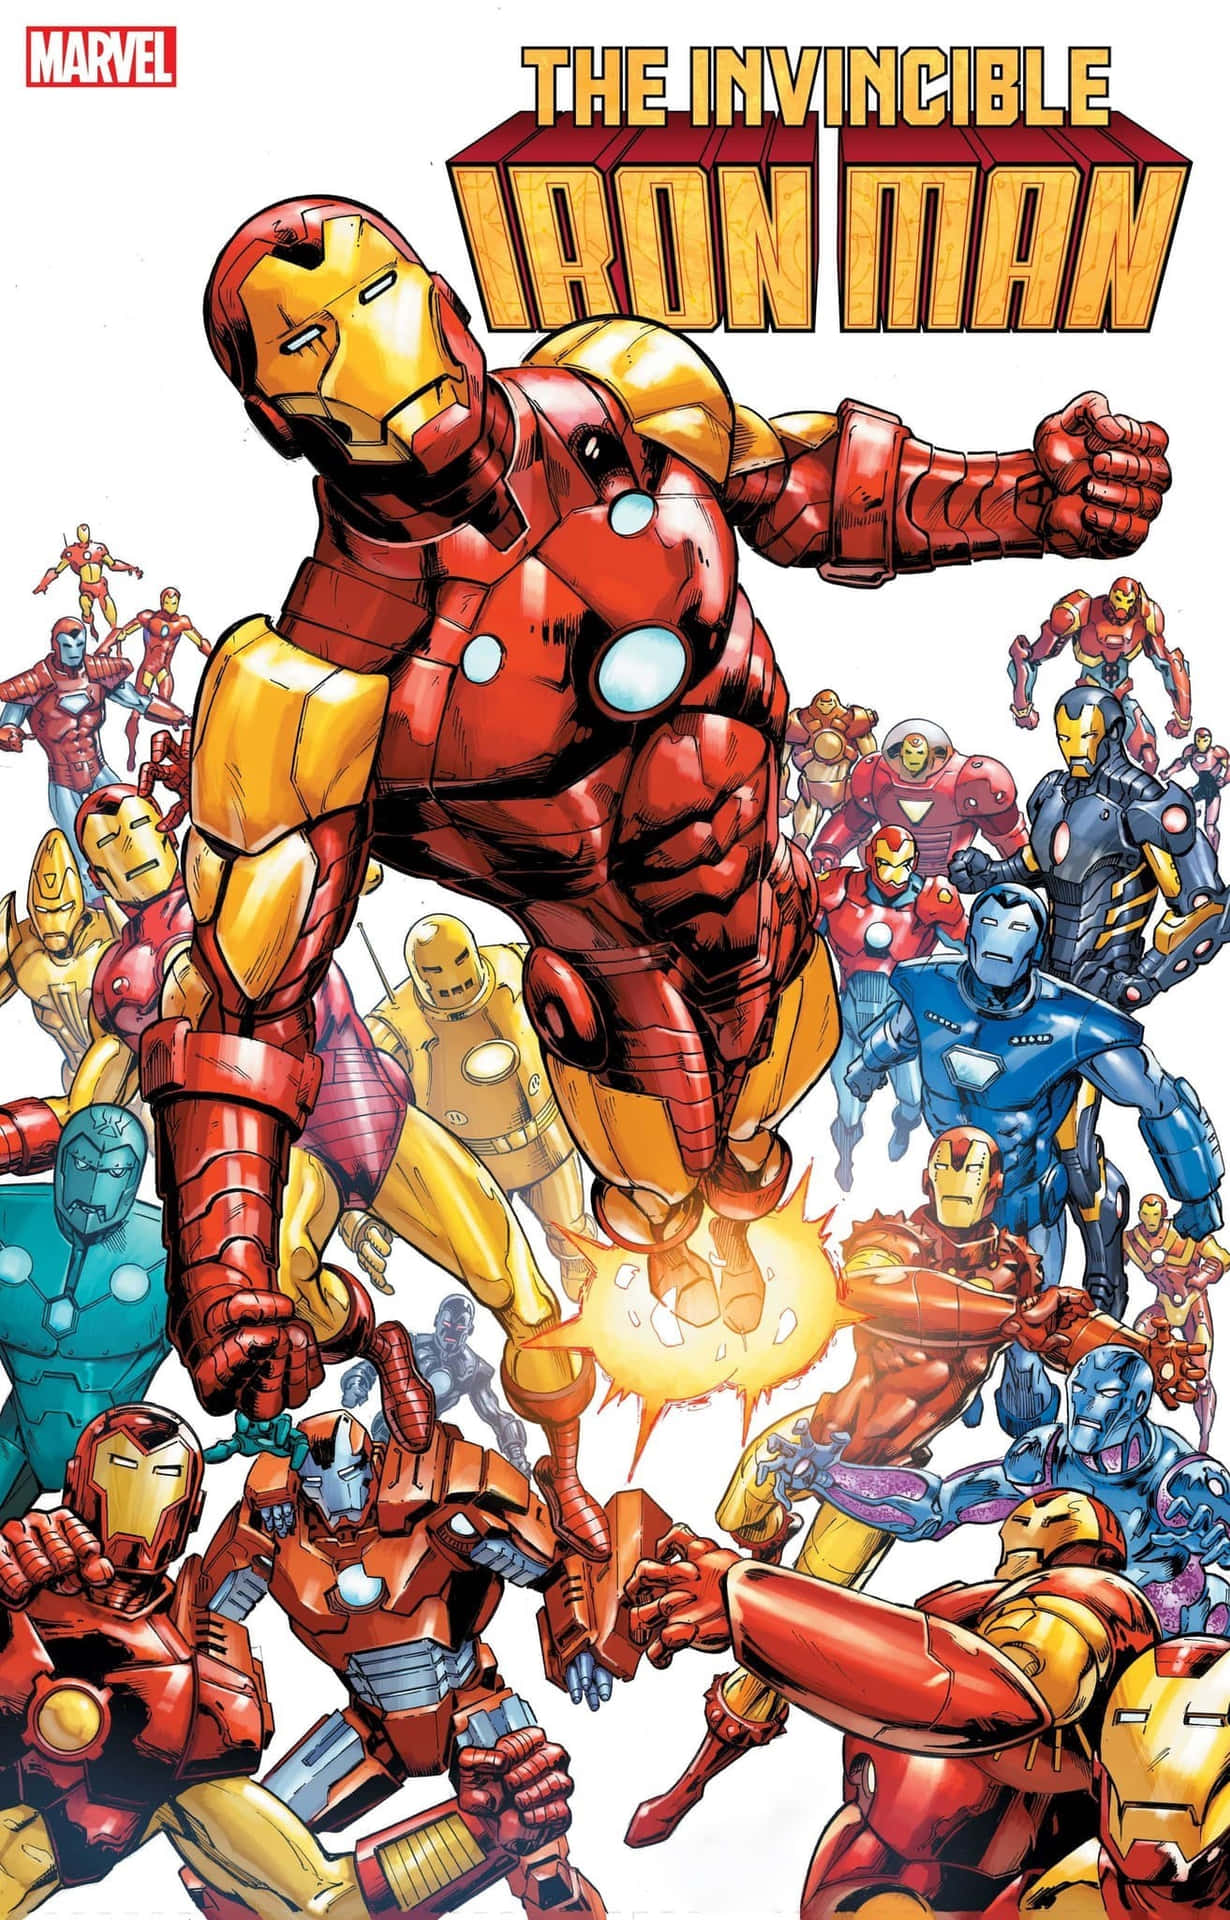 Iron Man Comics - Fight for justice! Wallpaper